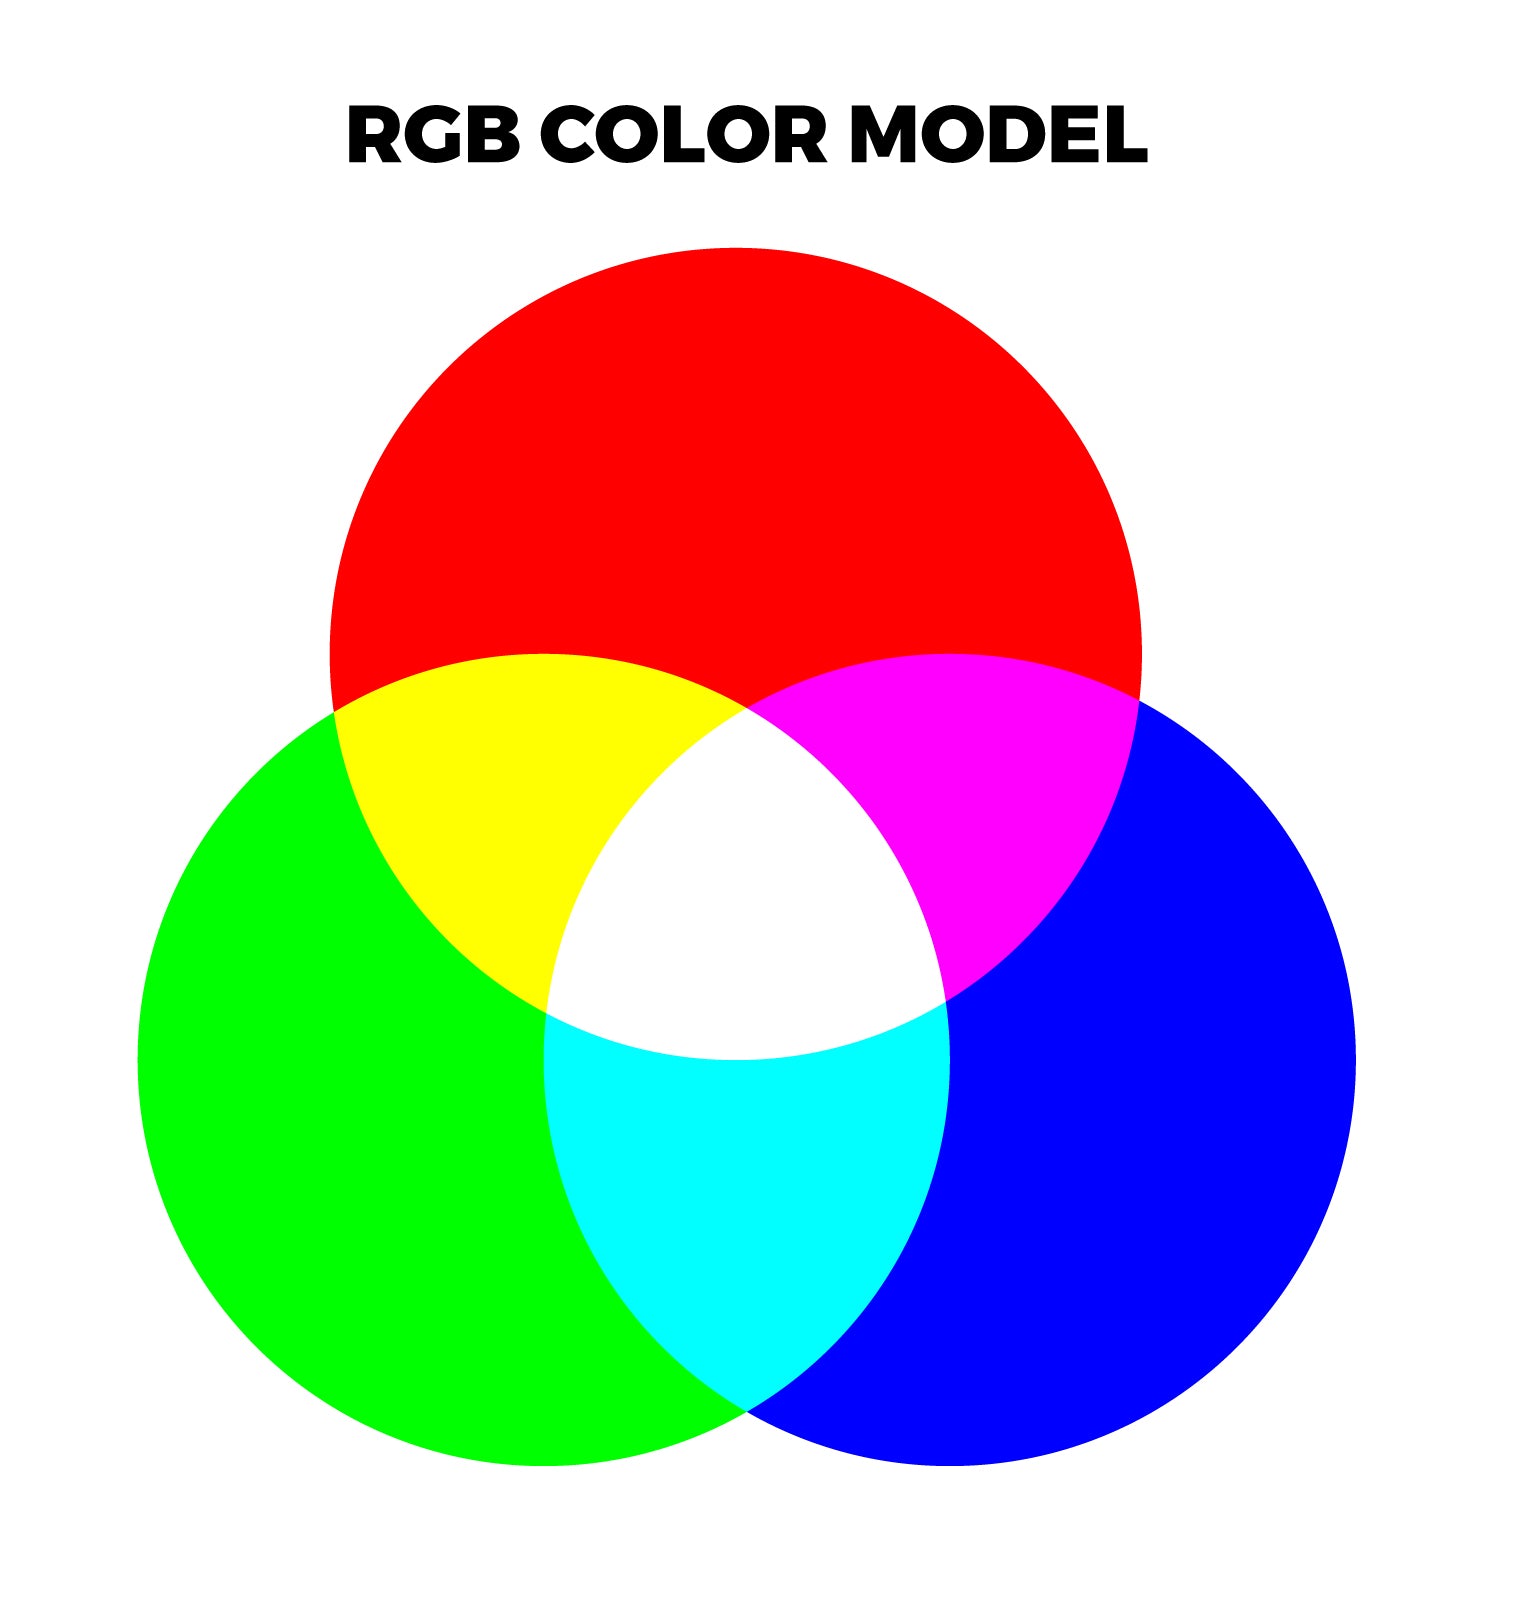 What-Color-Does-Yellow-and-Green-Make-When-Mixed-with-Lights-Additive-RGB-Color-Model